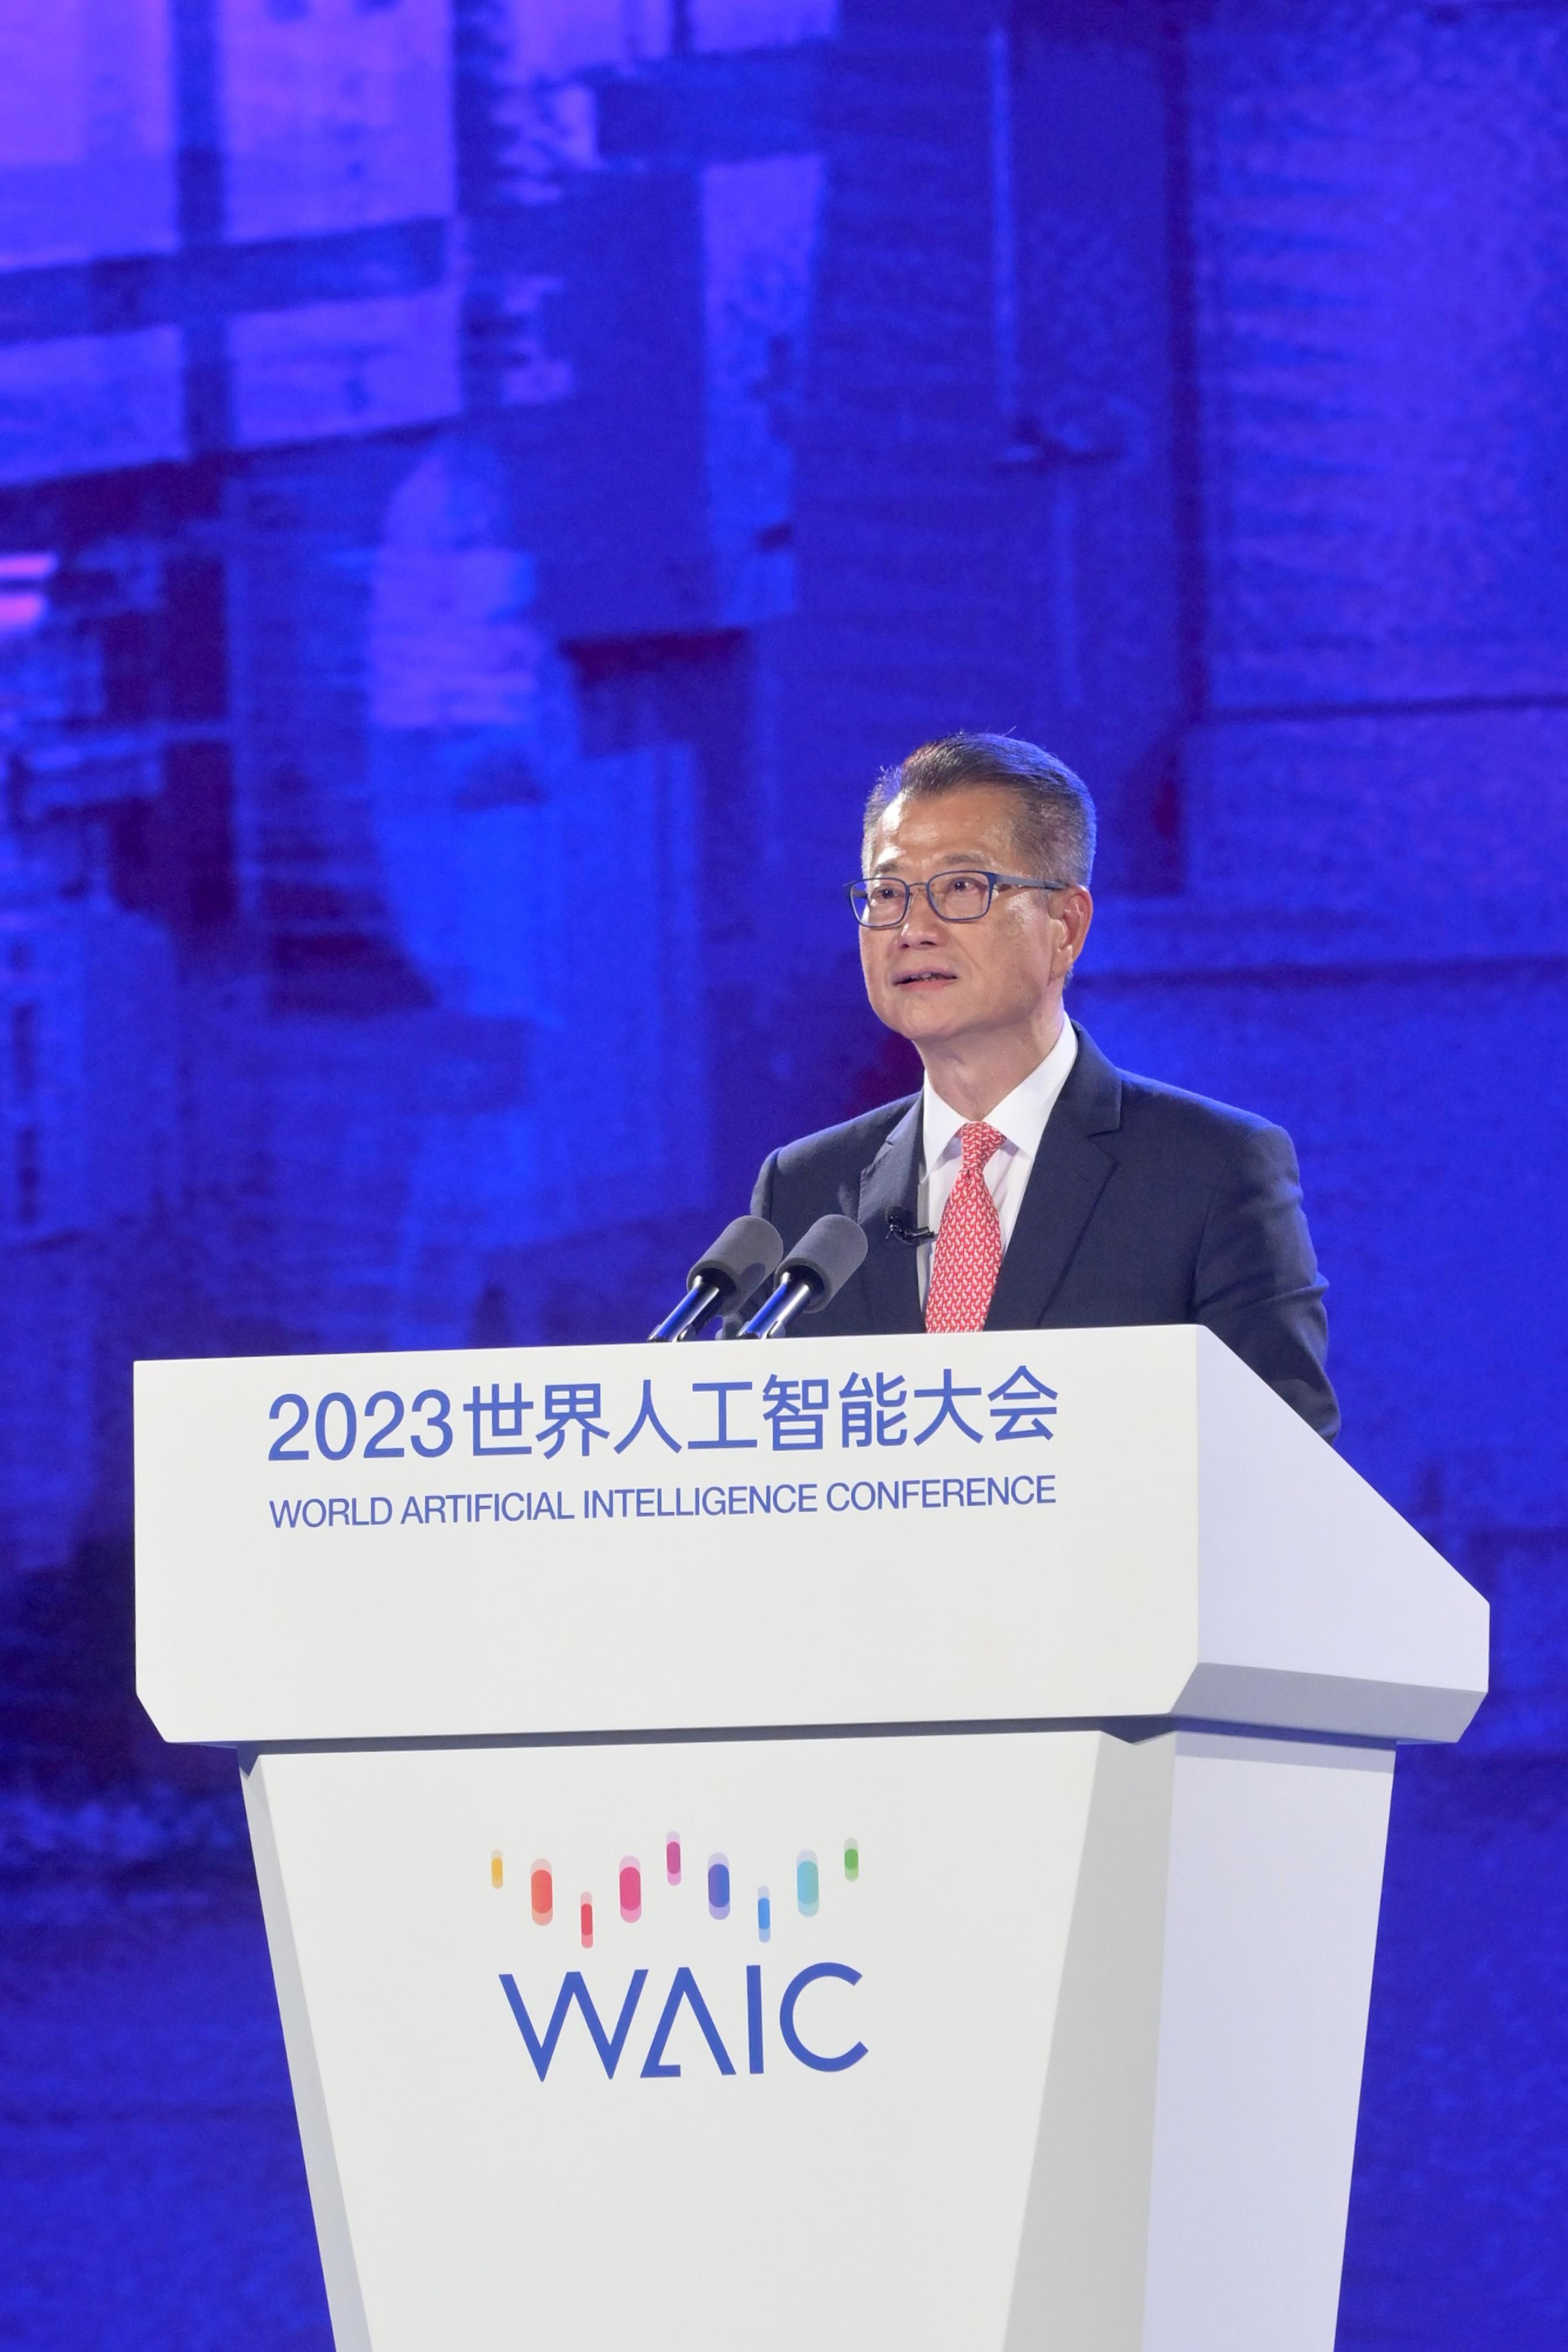 The Financial Secretary, Mr Paul Chan, delivered a keynote speech at the Plenary Session - Industry Development of the World Artificial Intelligence Conference 2023.